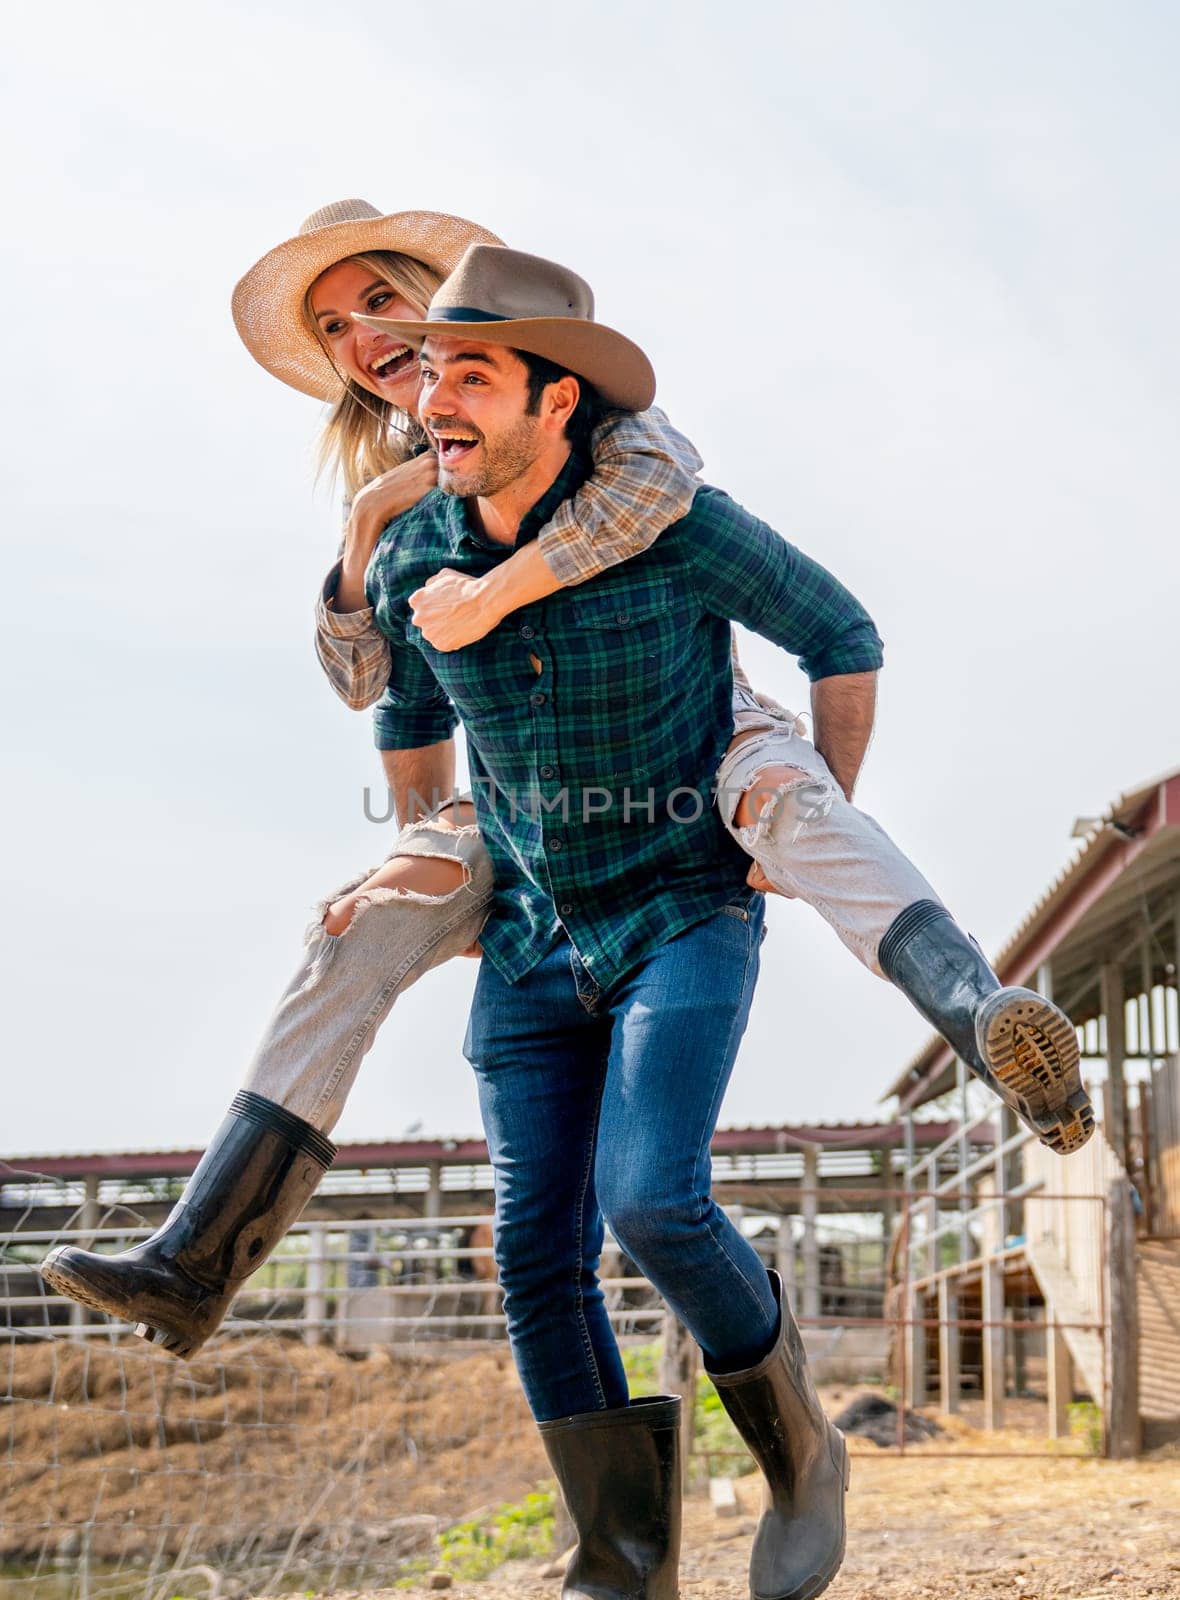 Vertical image of Caucasian man and woman farmer enjoy with woman riding on the back of man and go around the area of their farm with happiness and day light.